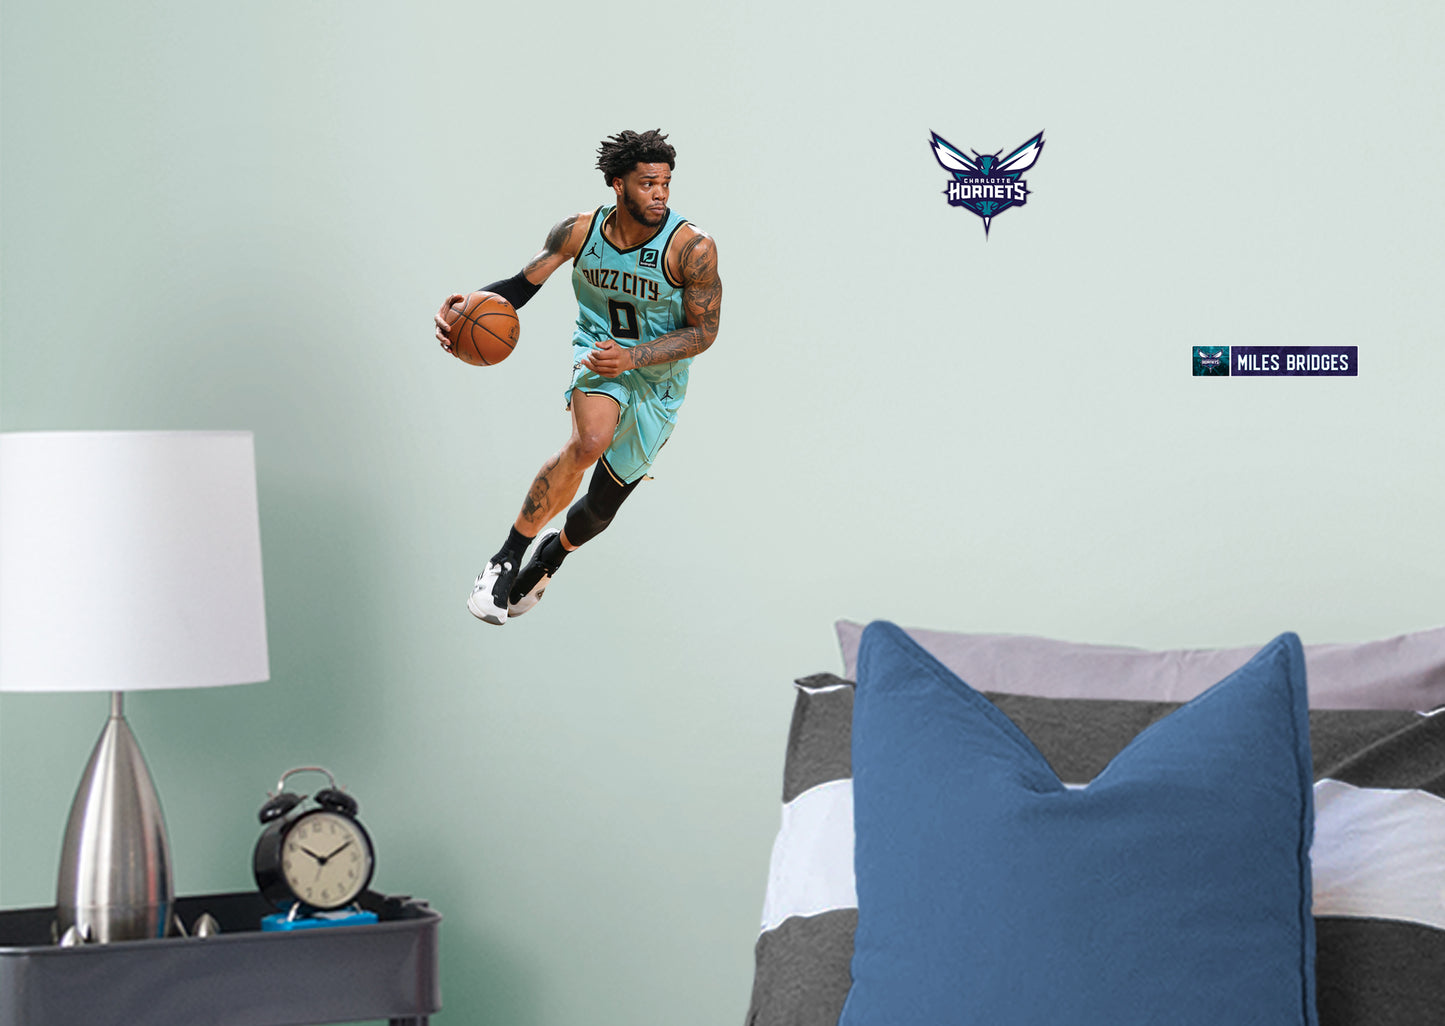 Charlotte Hornets: Miles Bridges  Buzz City        - Officially Licensed NBA Removable Wall   Adhesive Decal